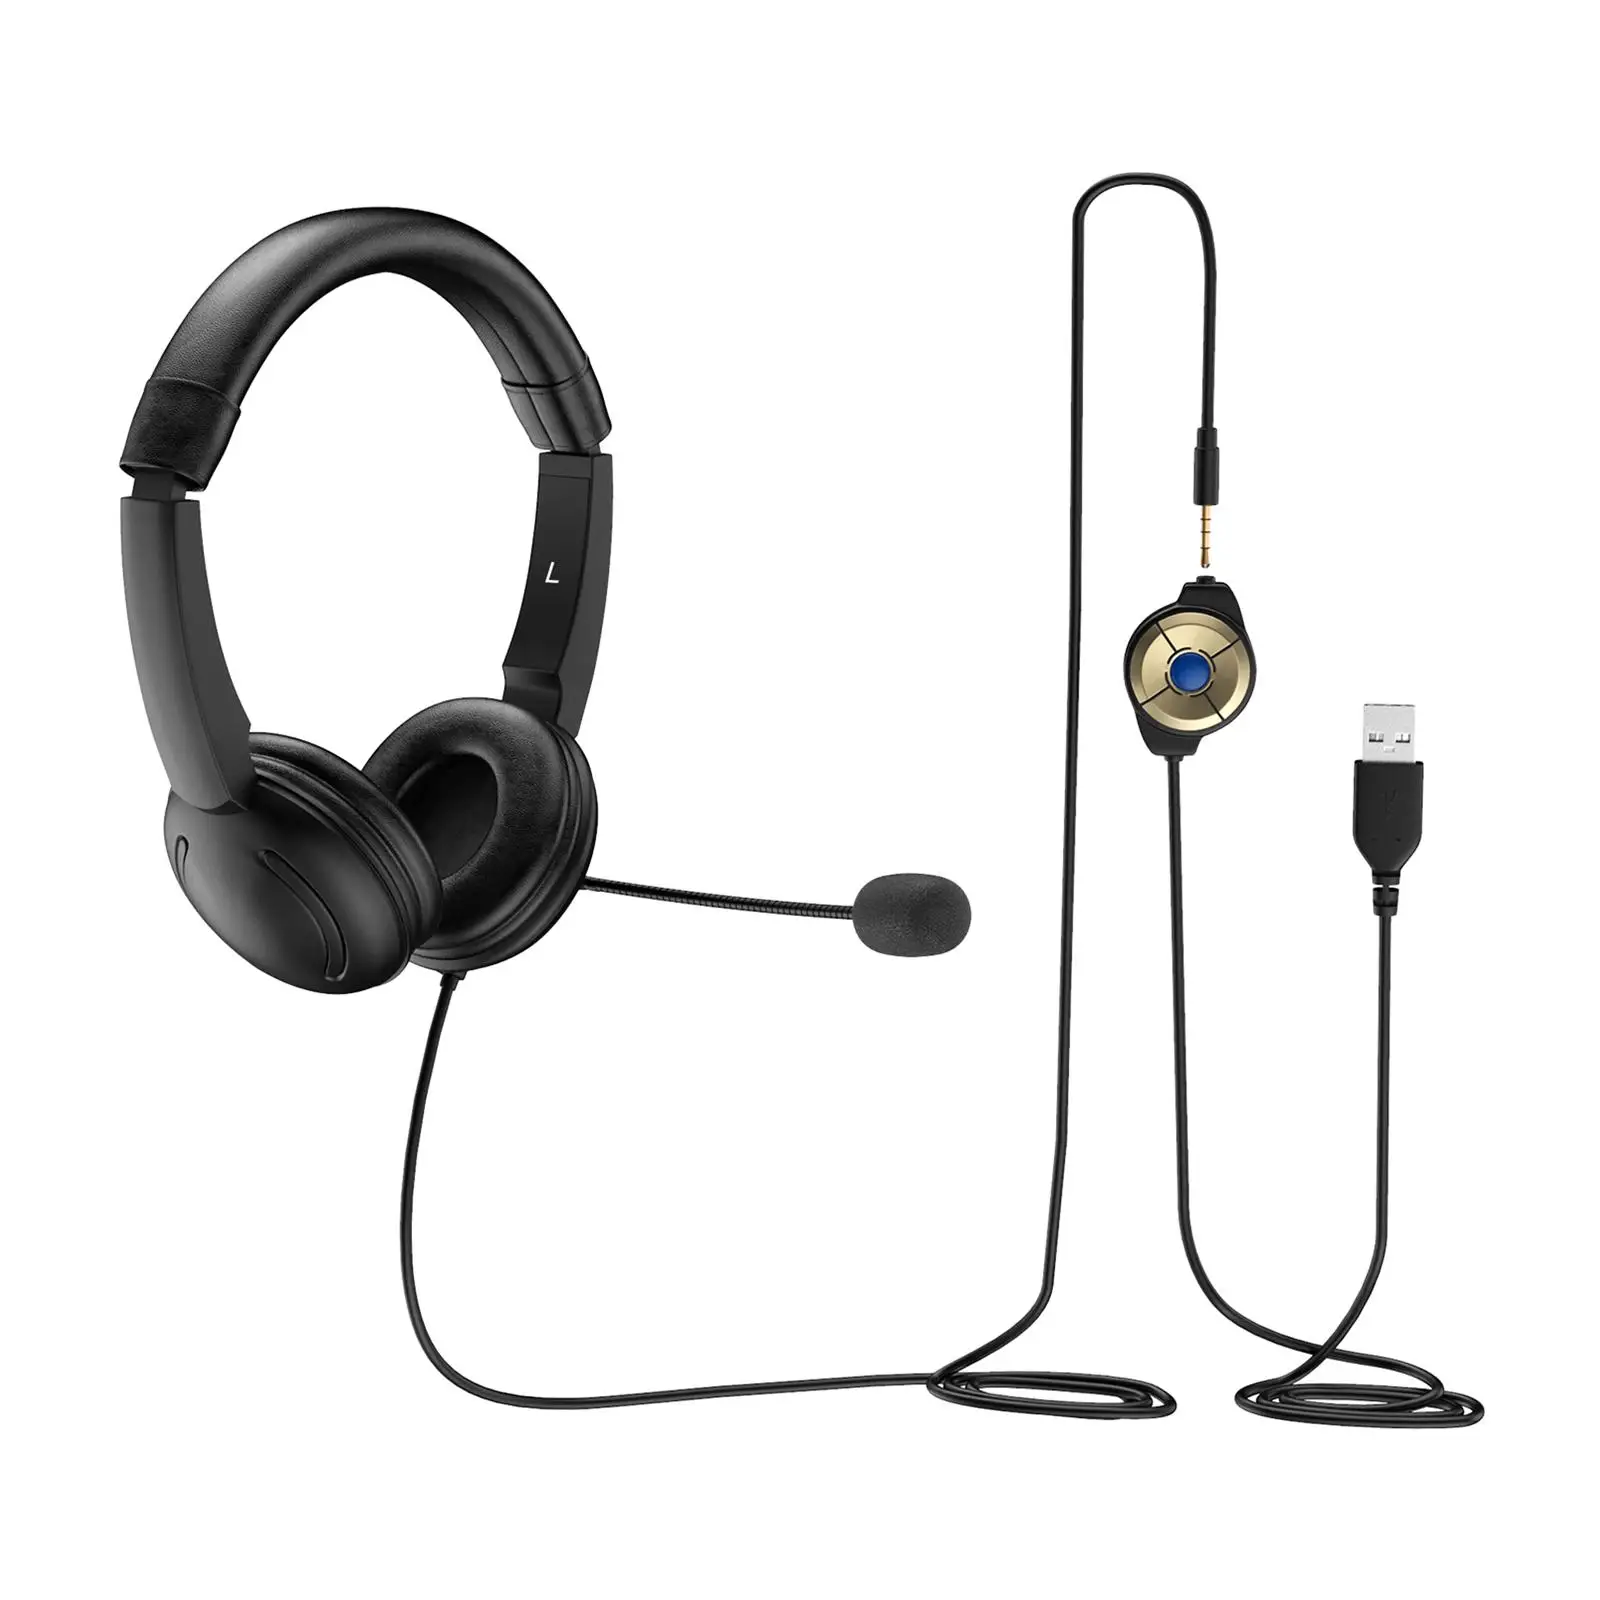 USB Headset Speaker with Noise Cancelling Microphone with in Line Controls Headphones for Gaming Video Meetings PC Music Laptop